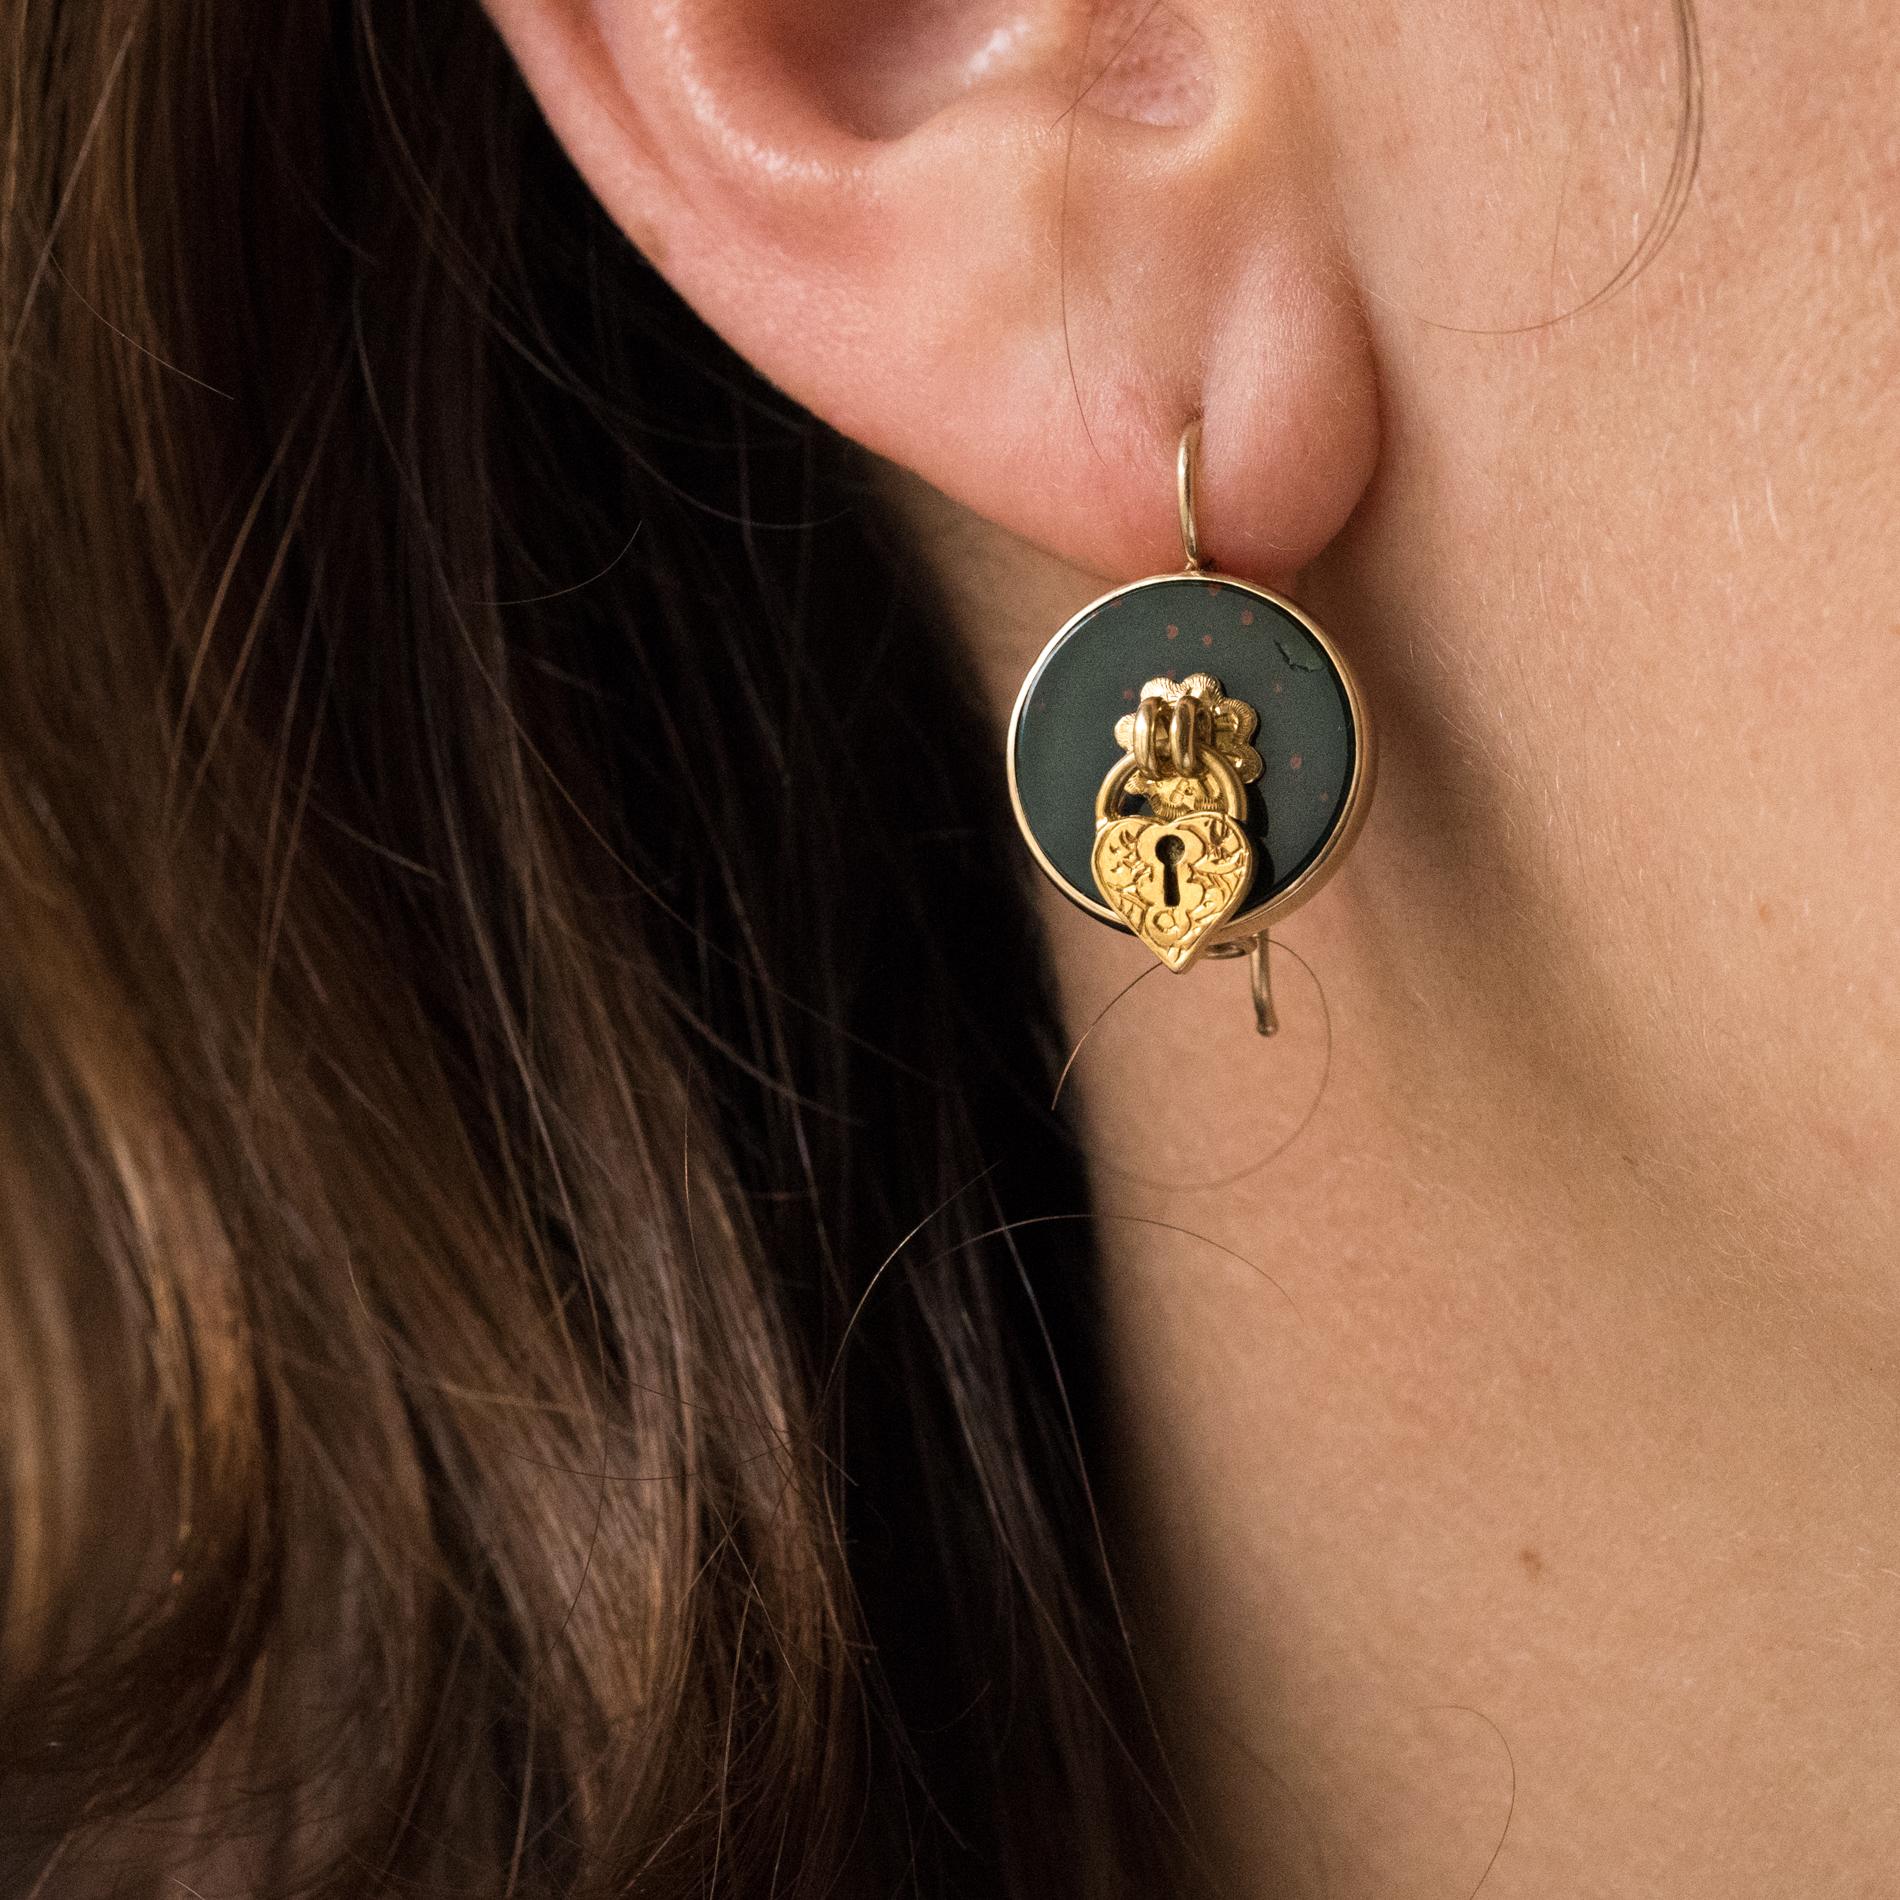 Pair of earrings in 14 karats yellow gold.
Round in shape, each is decorated with a blood jasper with a small flower in the center that holds a small padlock wich is in the shape of a chiseled heart. The hanging system is gooseneck with safety